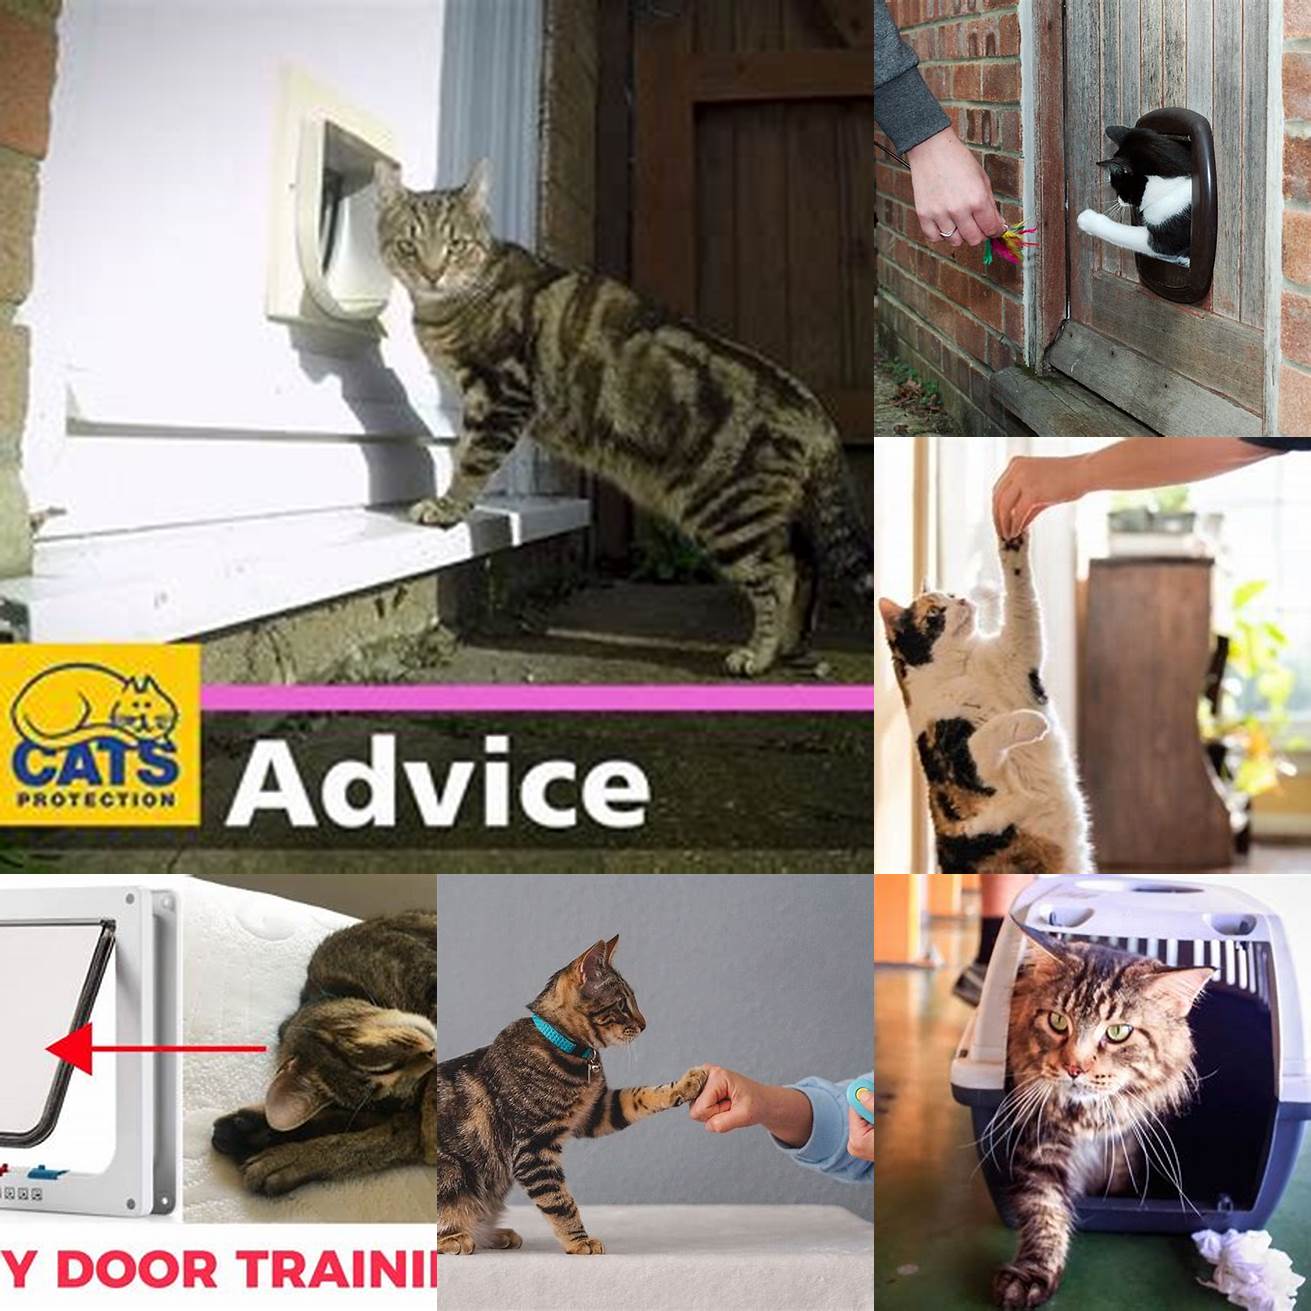 Train your cat to use the door by placing treats or toys on the other side